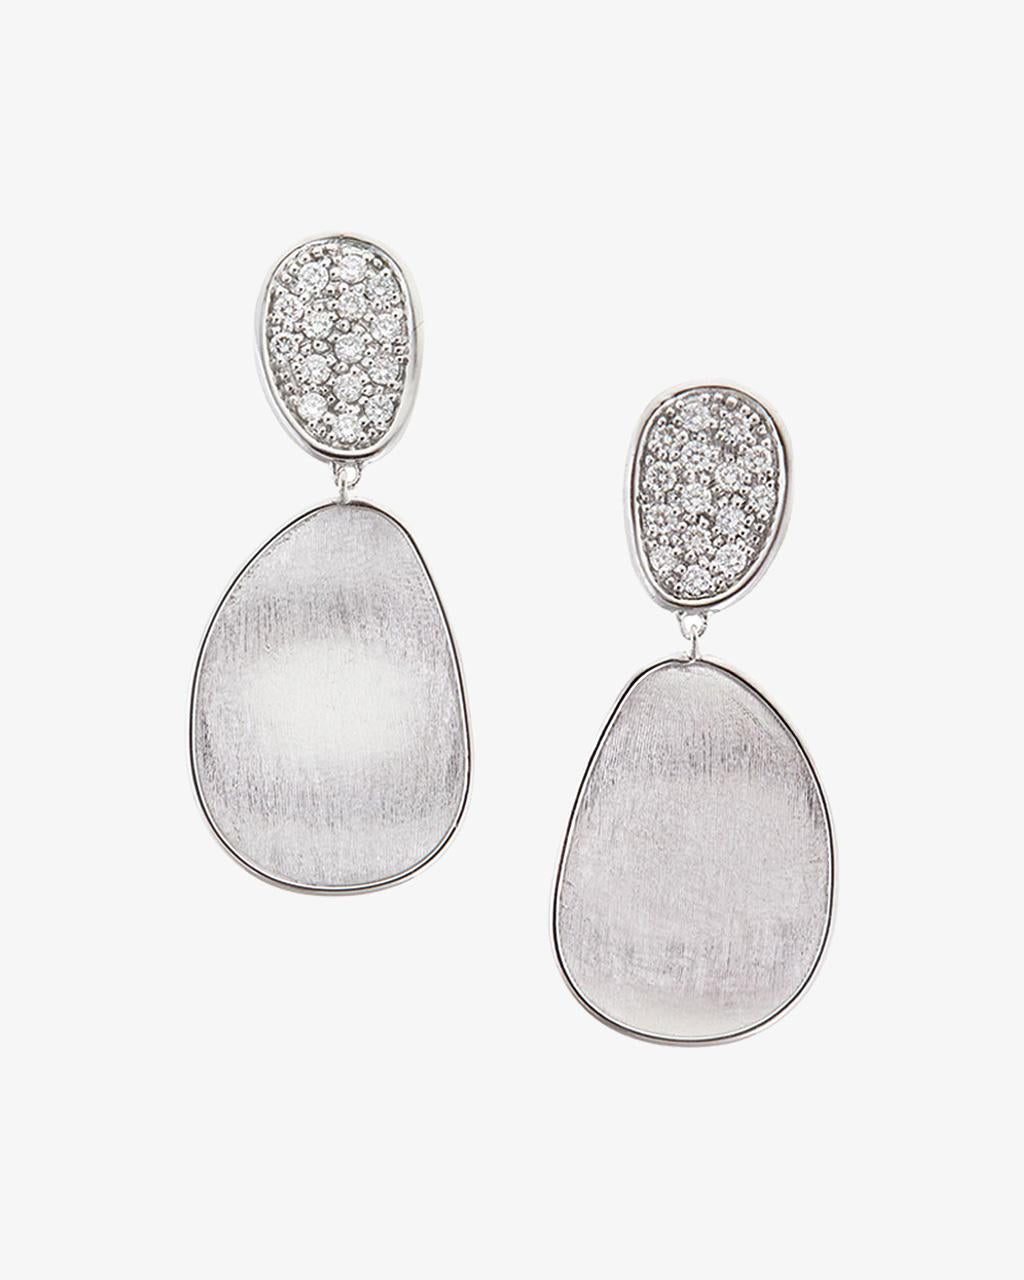 Marco Bicego Lunaria Collection Pave Diamond Drop Earrings